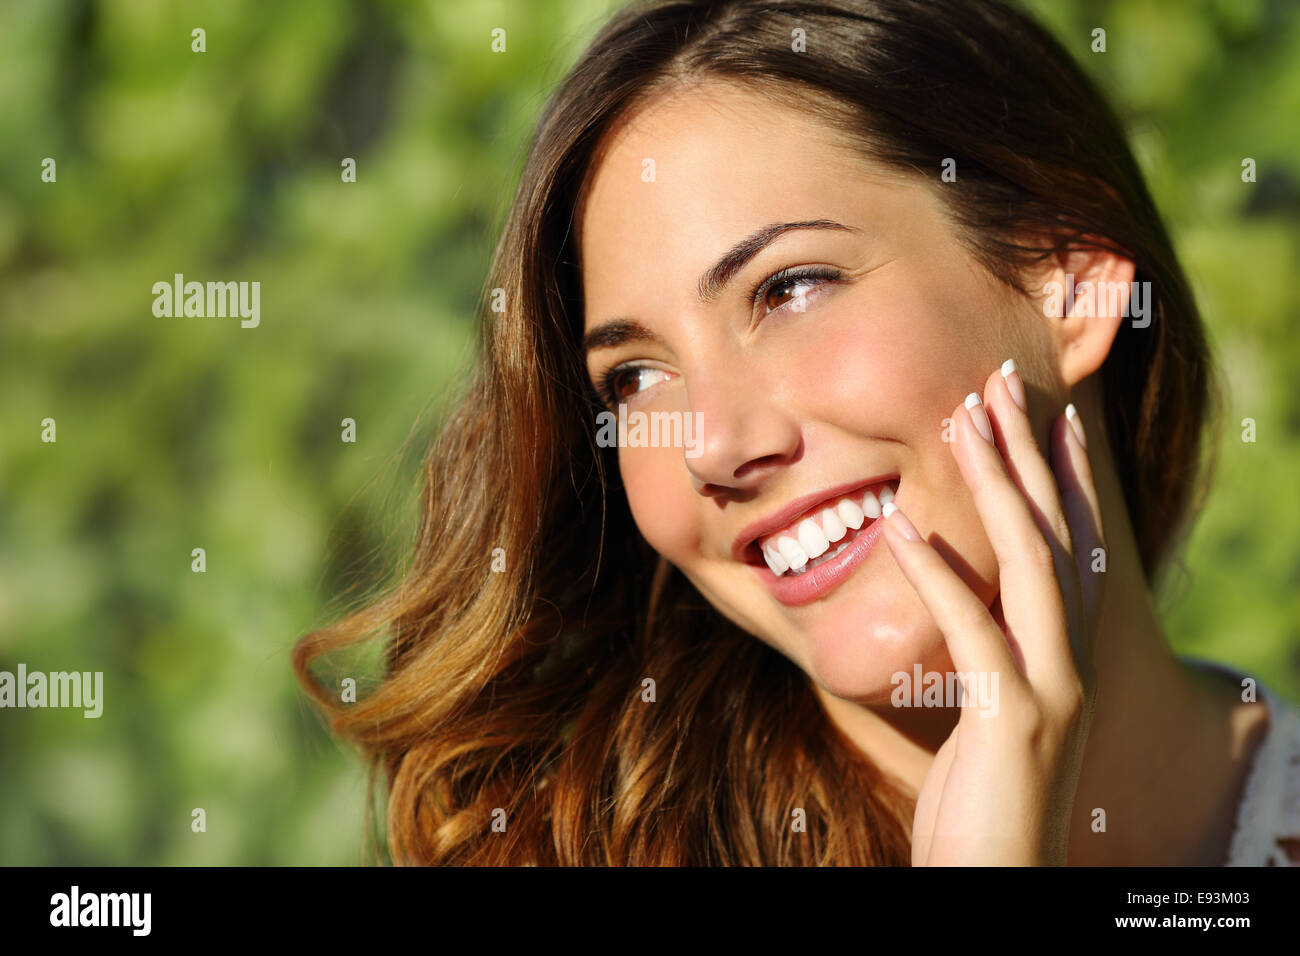 Beauty woman with a perfect smile and white tooth with a green background Stock Photo